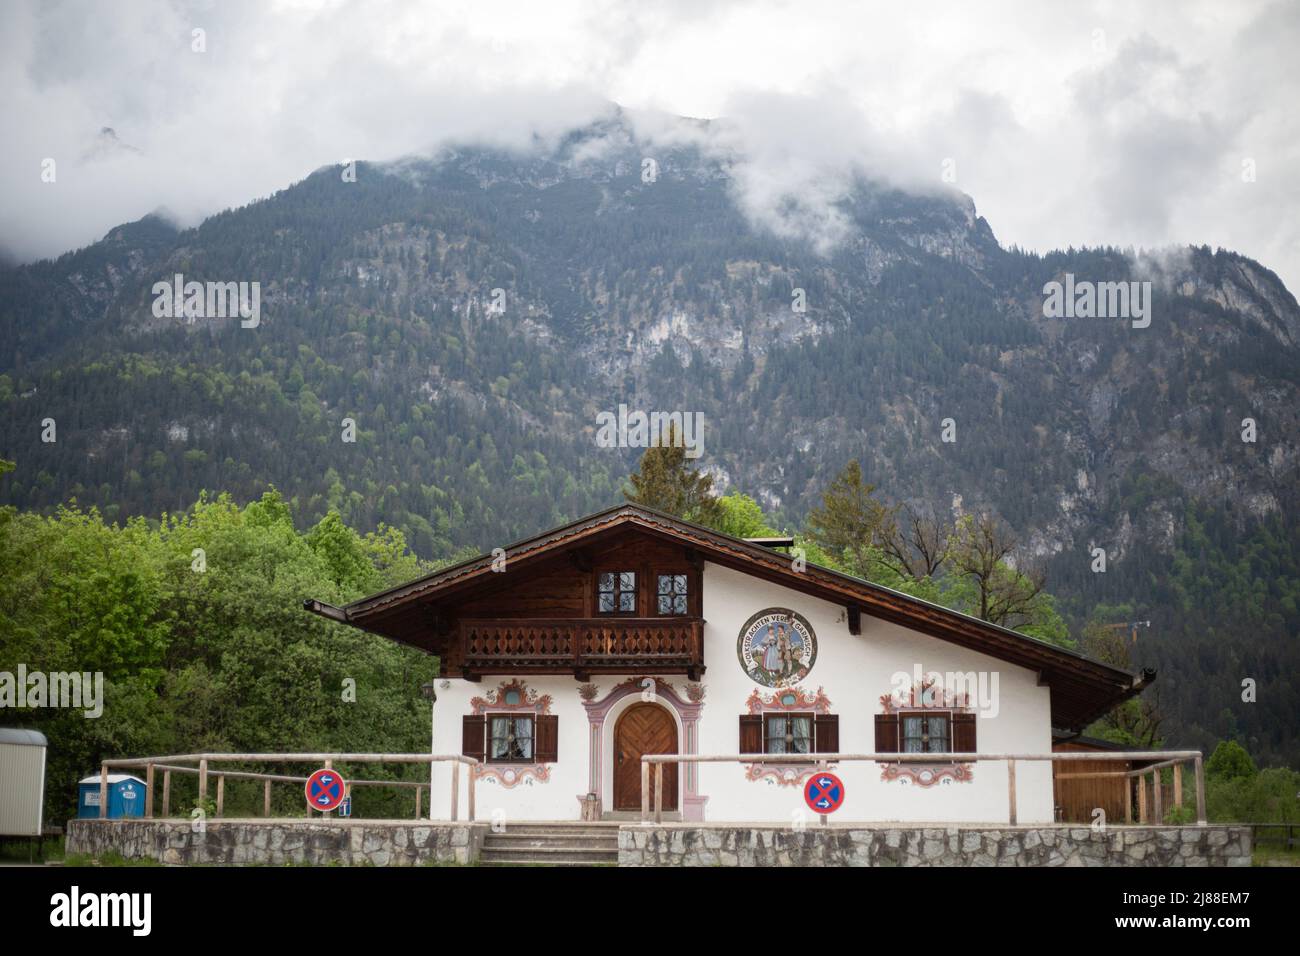 Garmisch-Partenkirchen has been preapring for the G7 meeting on May 13, 2022 for months. The G7 meeting will take place in Schloss Elmau, near Garmisch-Patenkirchen from June 26 until June 28 2022. (Photo by Alexander Pohl/Sipa USA) Stock Photo